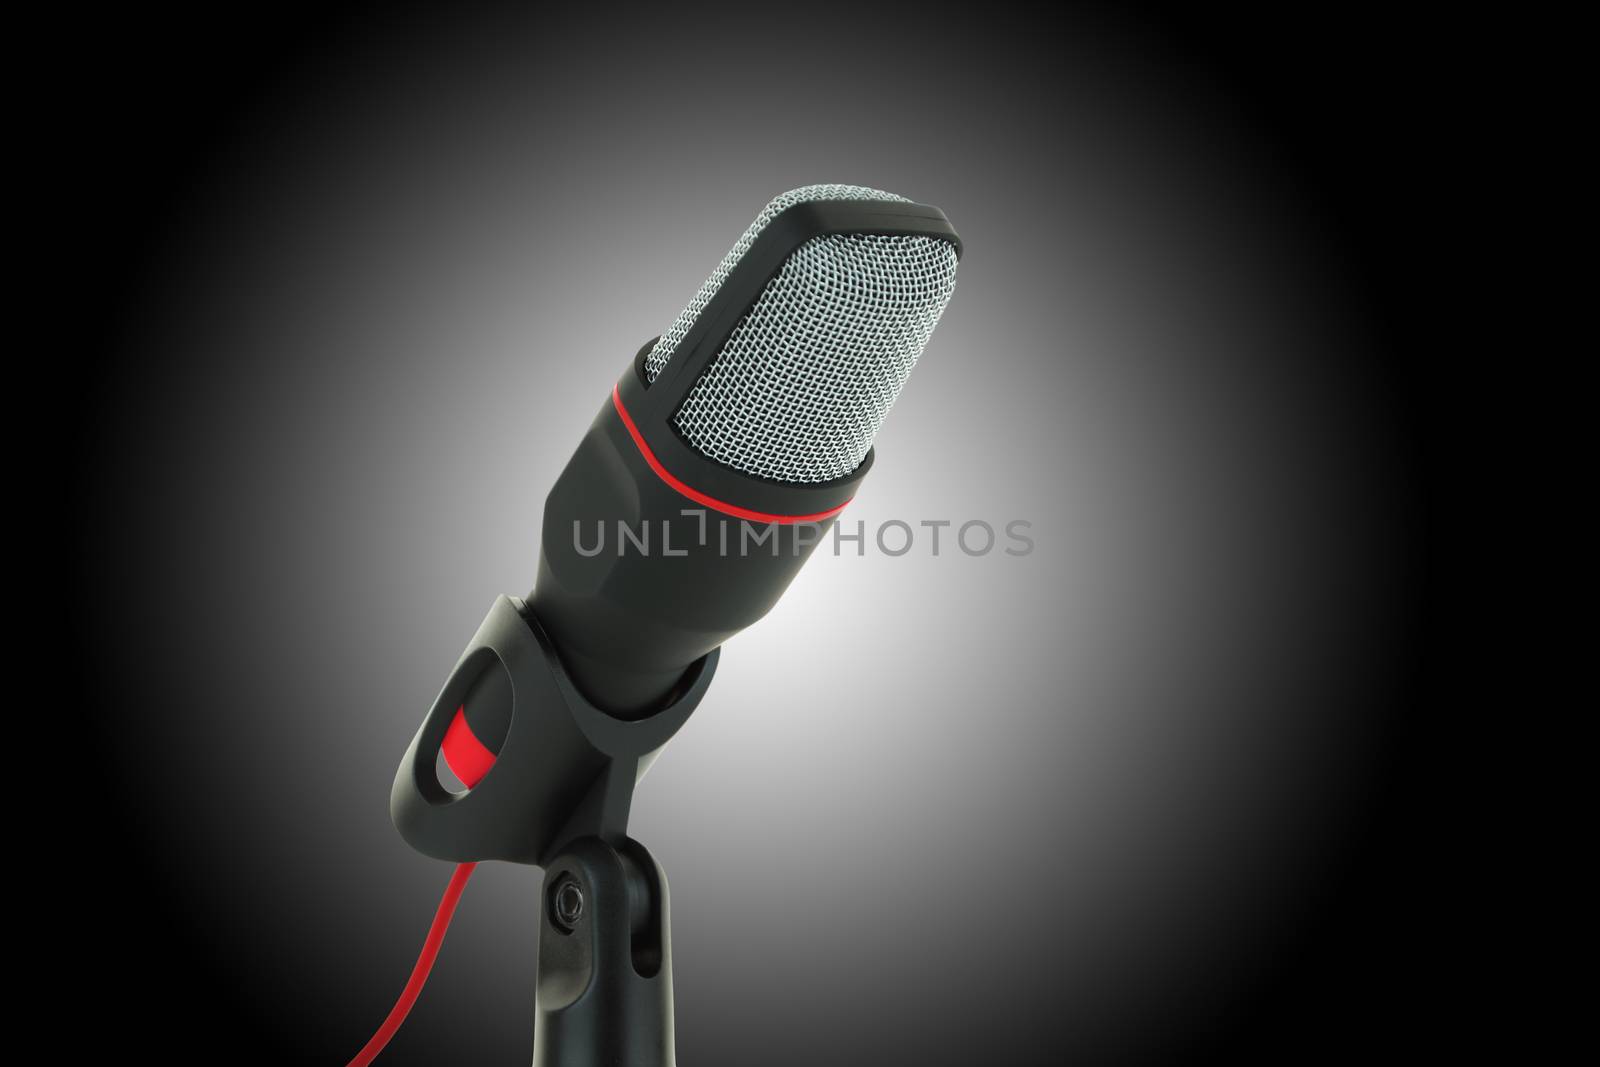 A black and red microphone on dark background